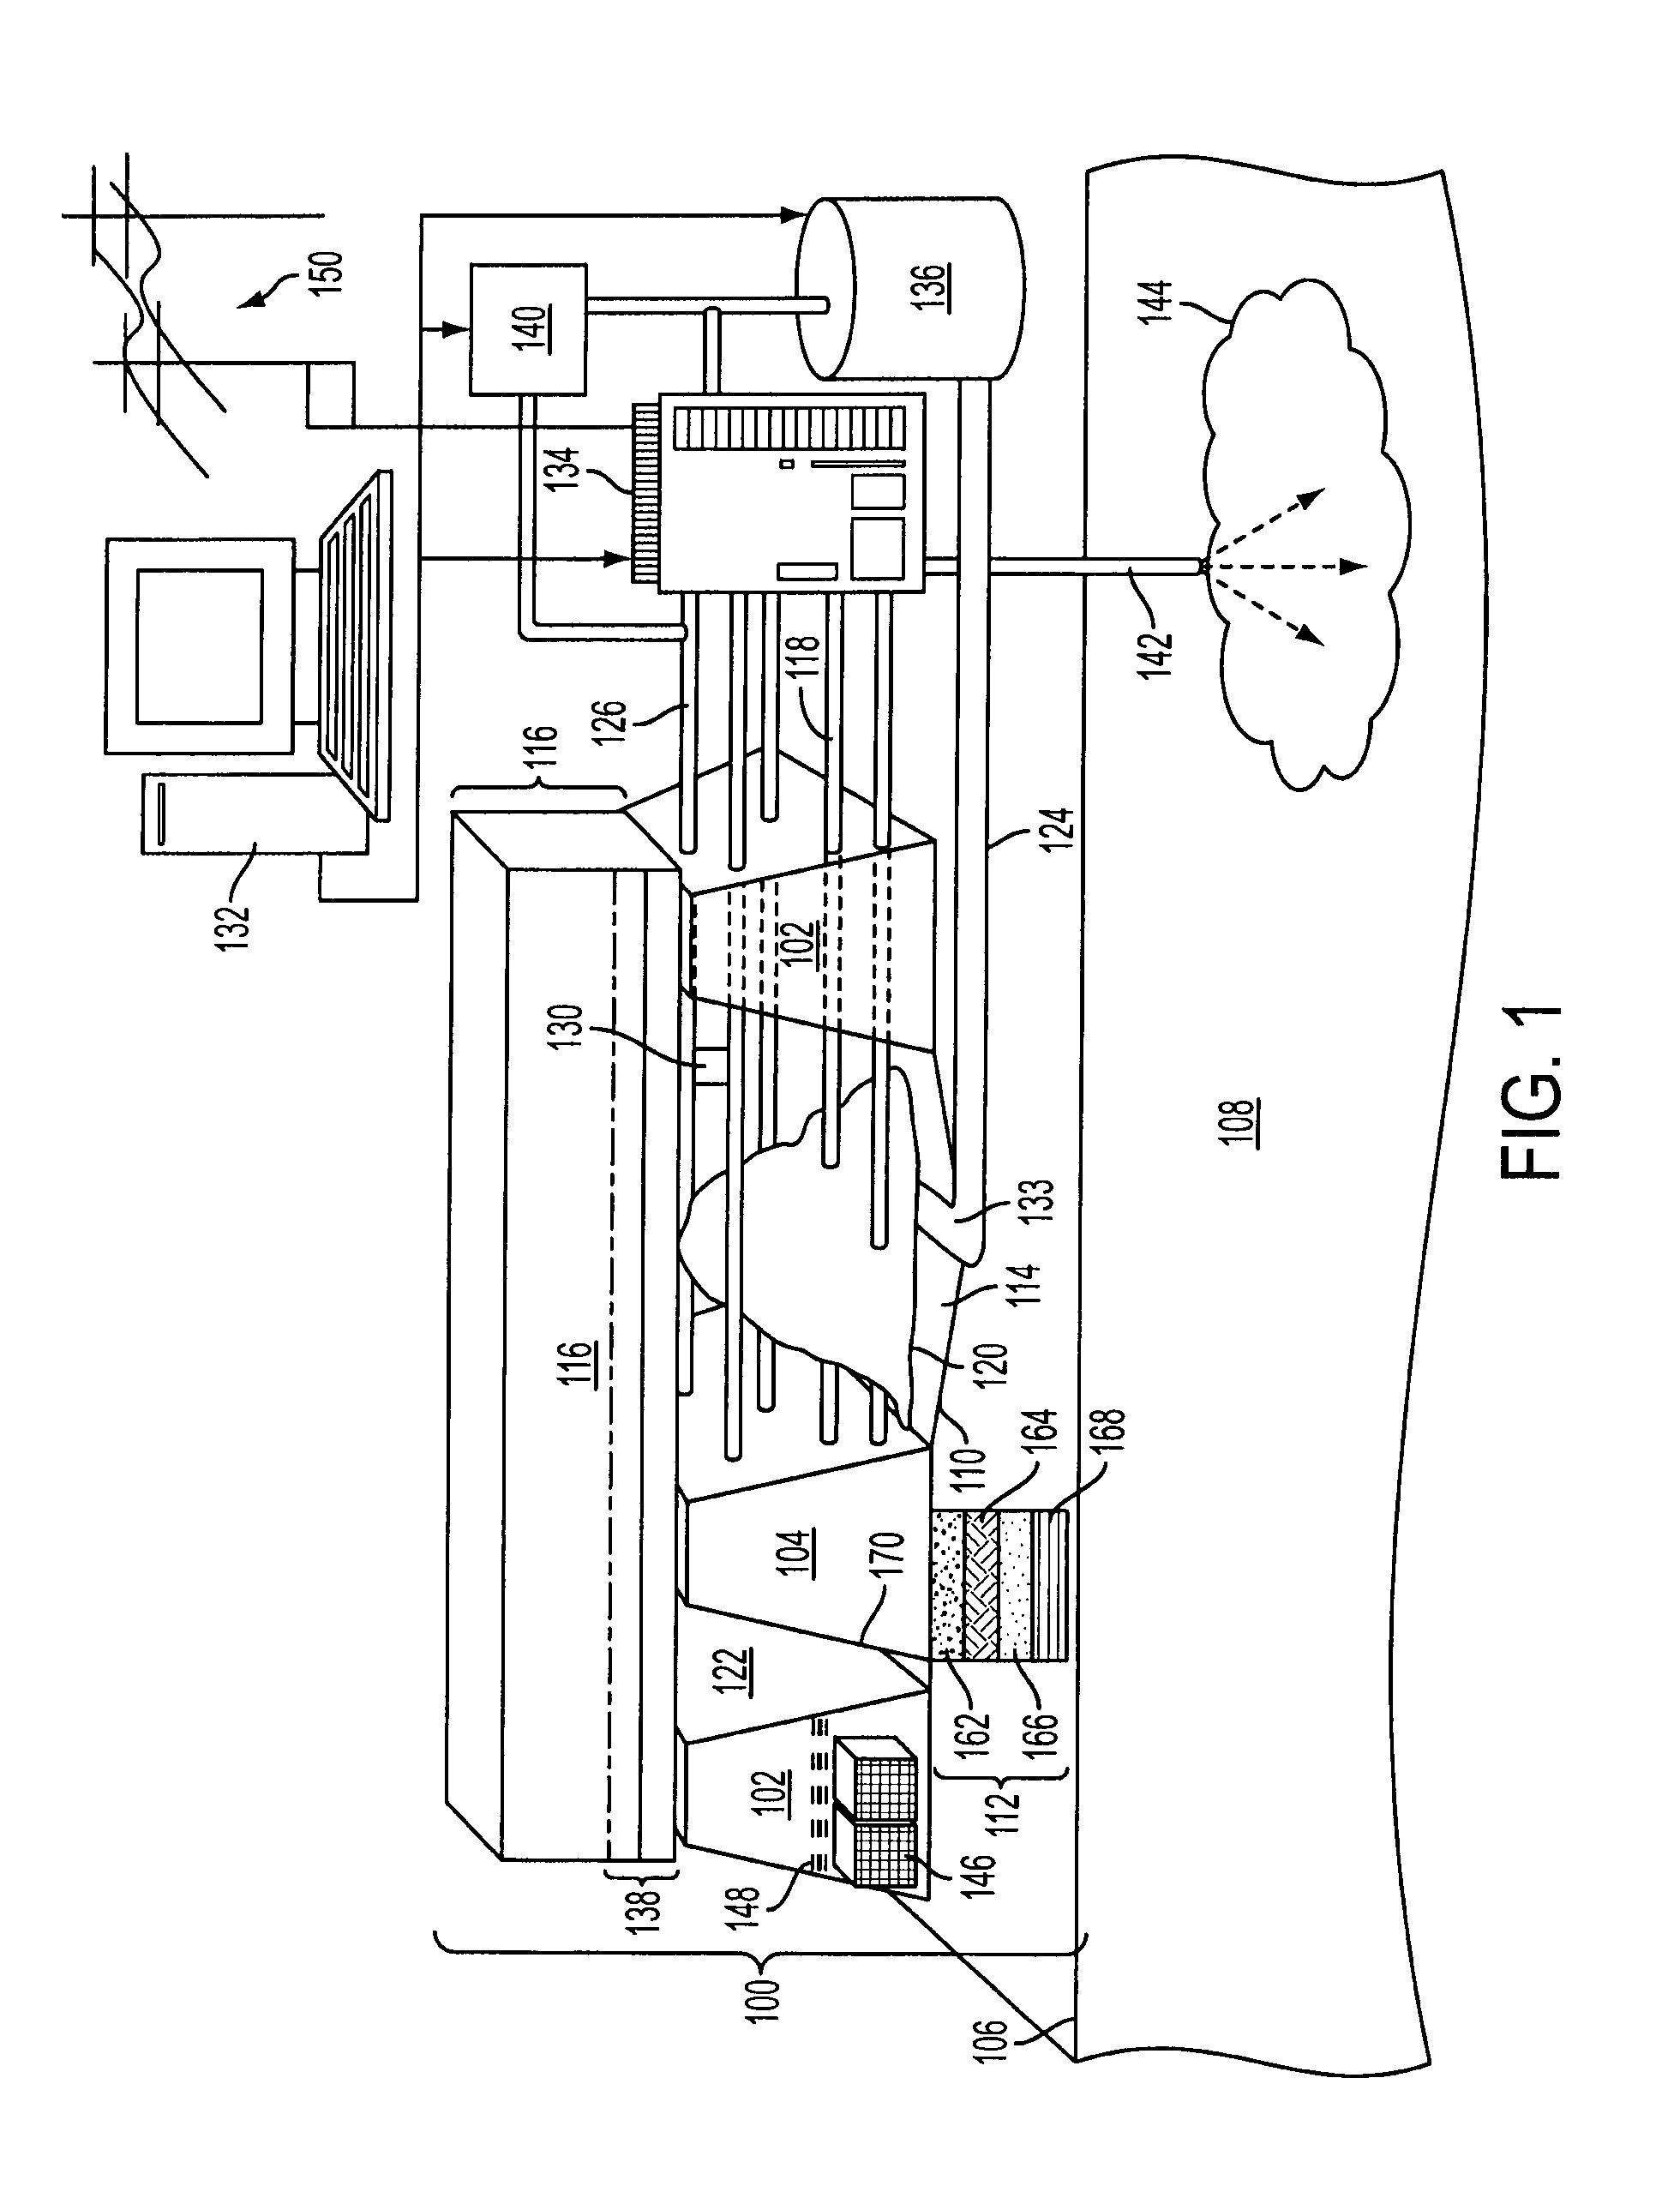 Methods of recovering hydrocarbons from hydrocarbonaceous material using a constructed infrastructure having permeable walls and associated systems